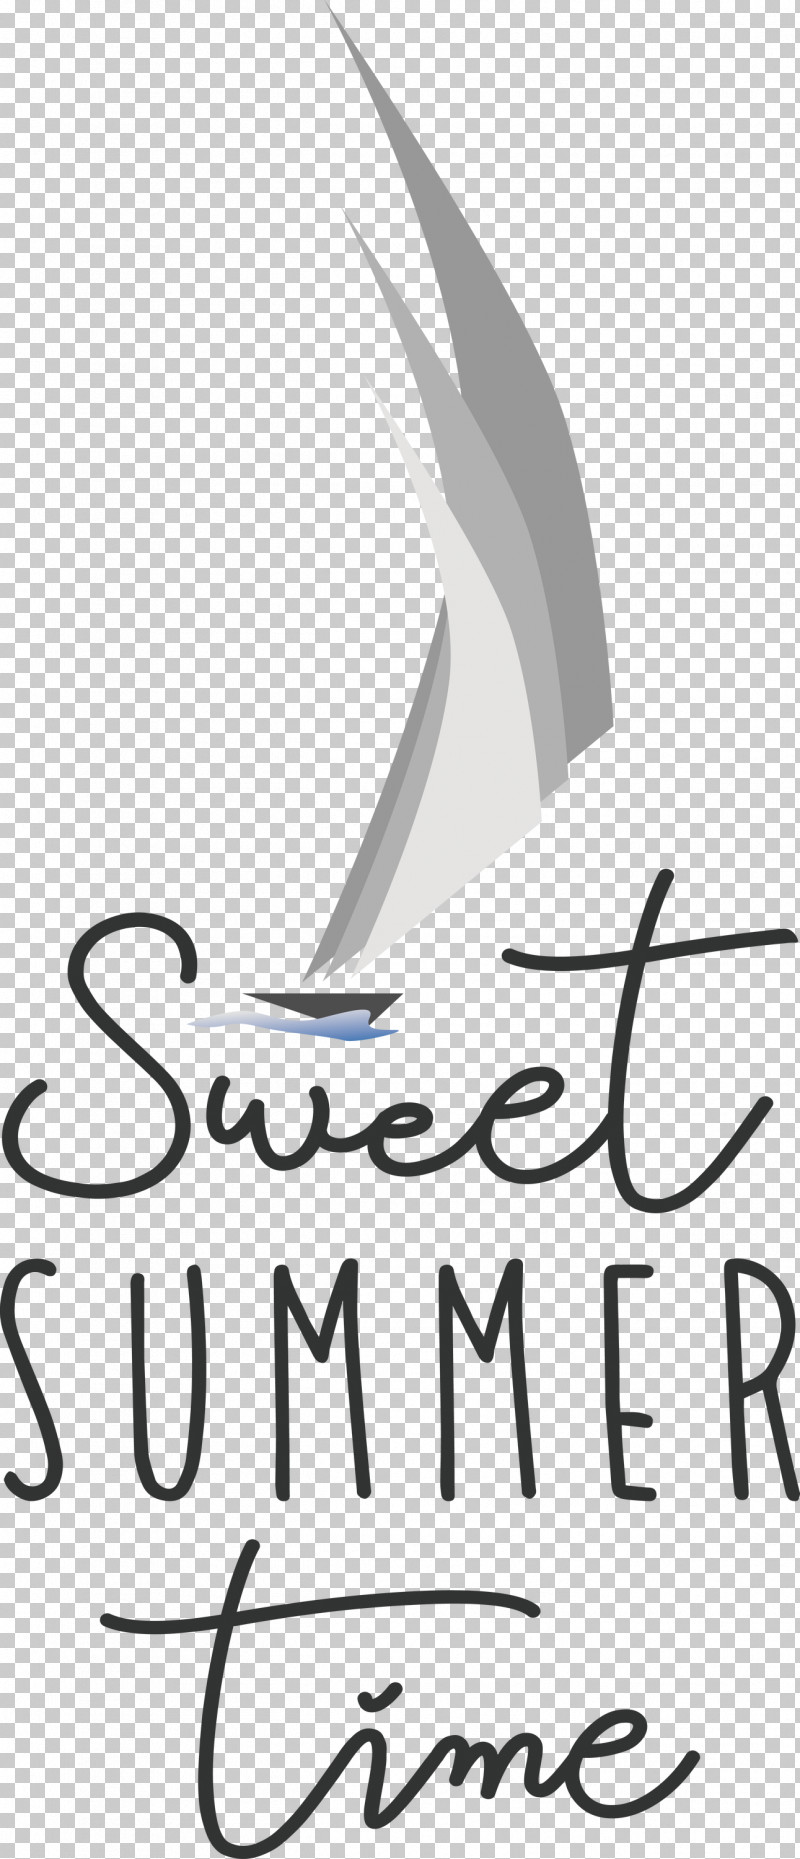 Sweet Summer Time Summer PNG, Clipart, Beak, Birds, Black, Black And White, Calligraphy Free PNG Download